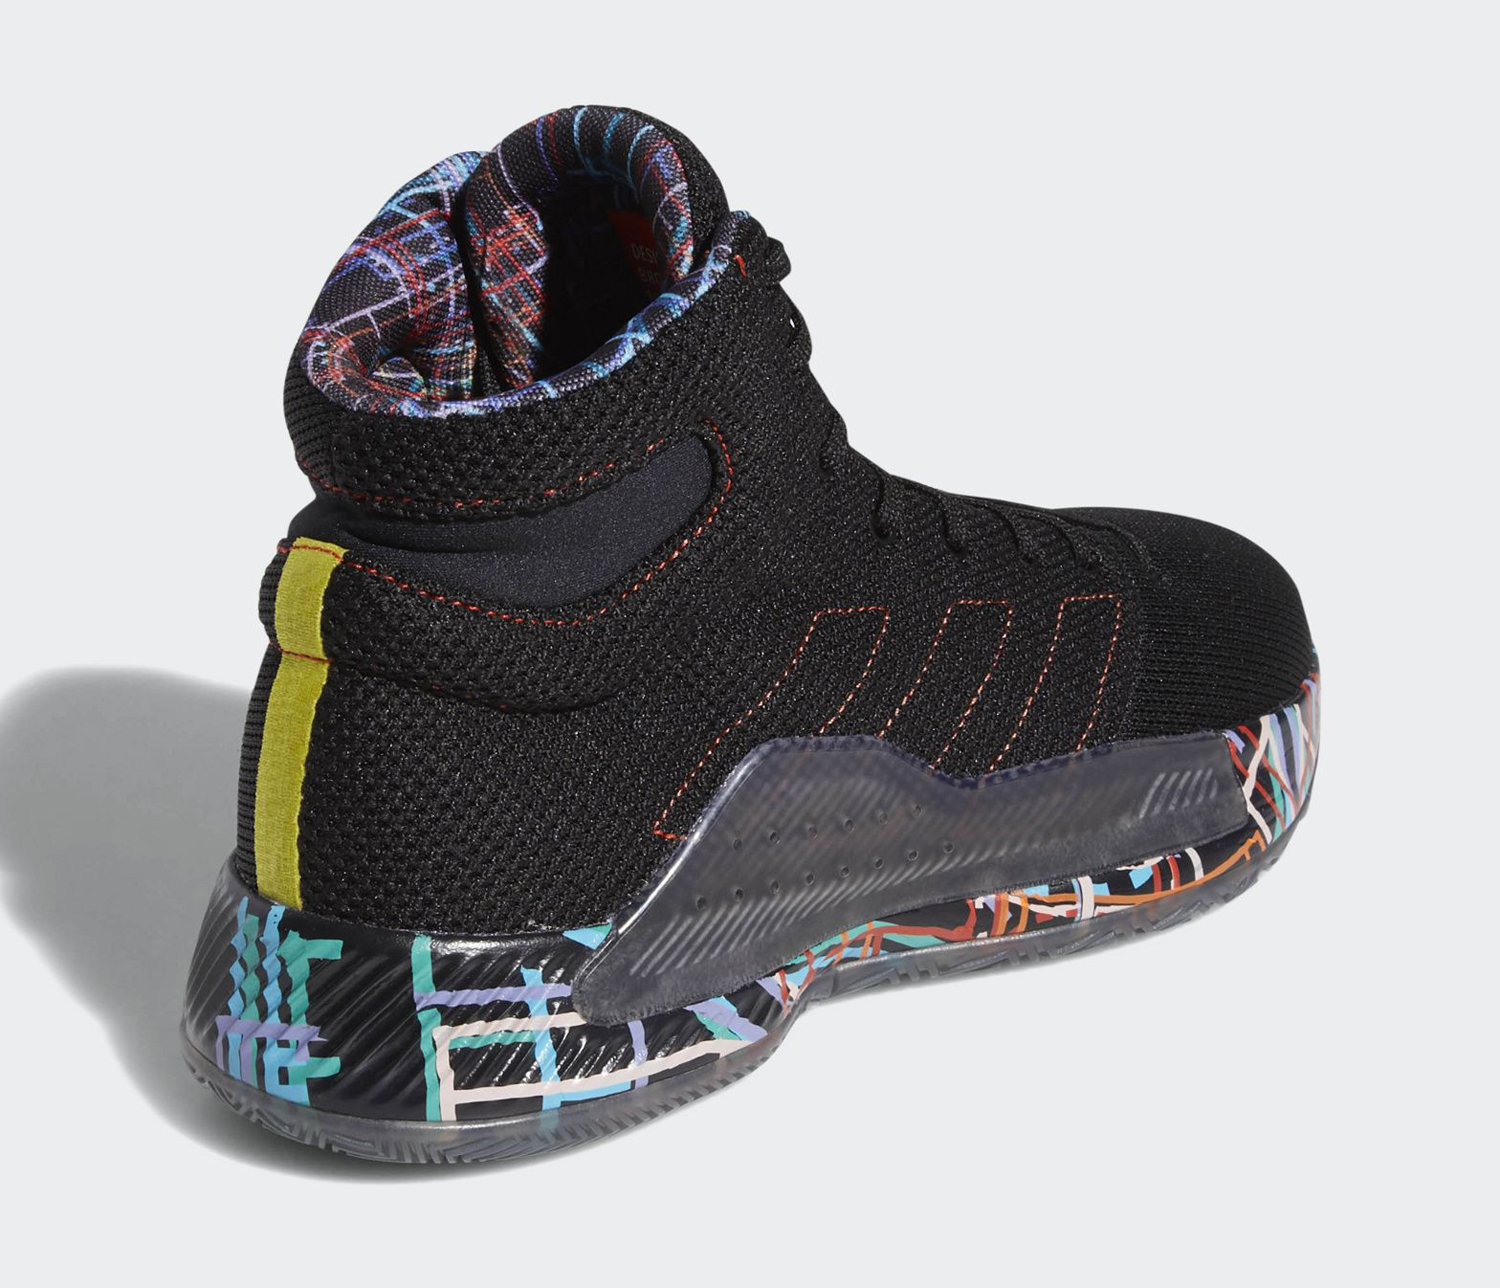 compañero riqueza Vaticinador An Official Look at the adidas Pro Bounce Madness 2019 - WearTesters